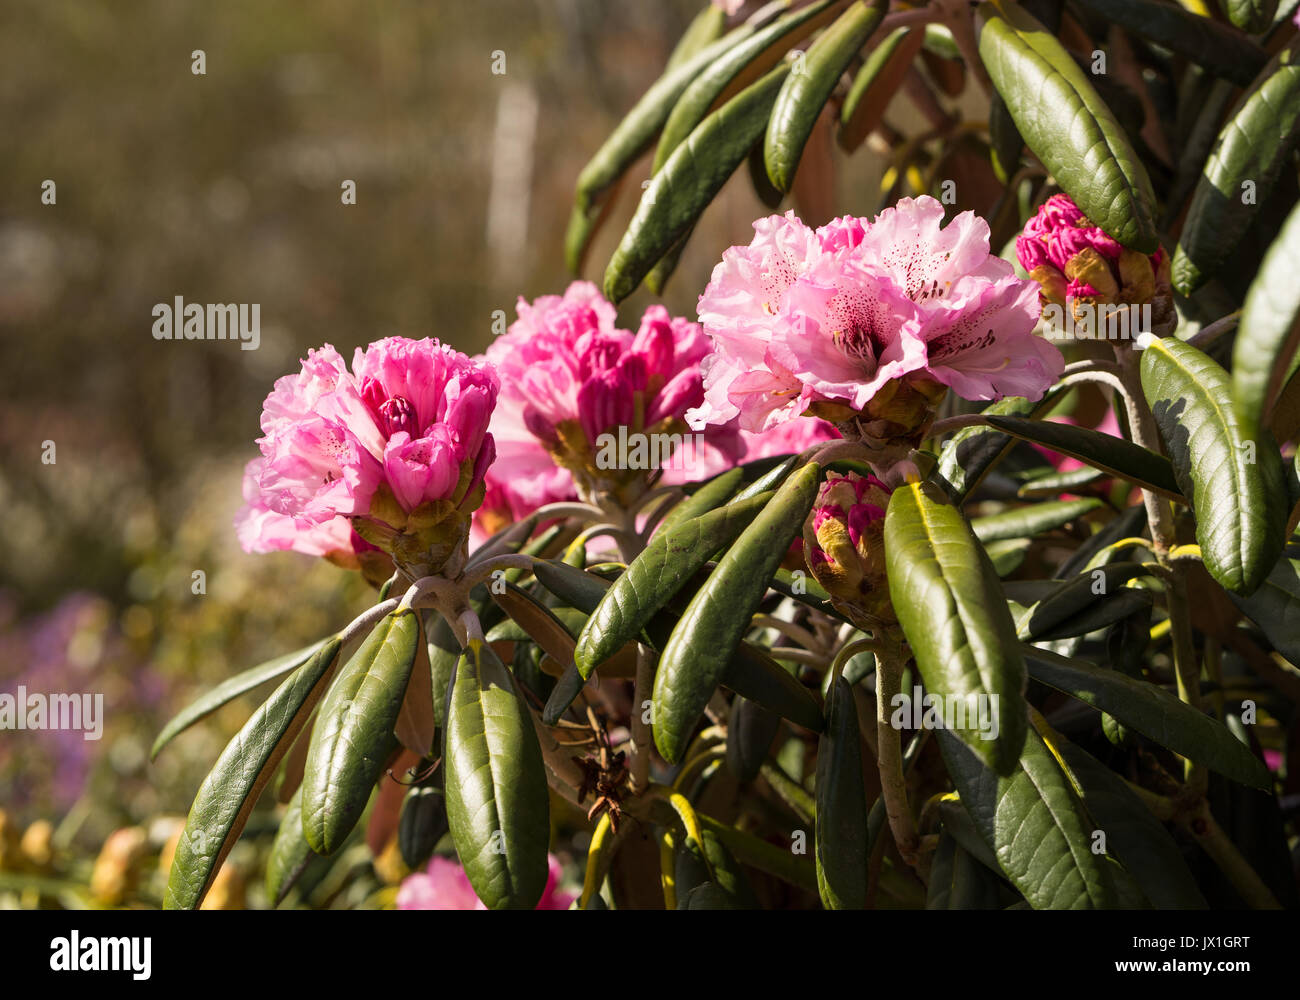 Rhododendron aganniphum flowers in full bloom in spring with beautiful decorative bright pink flowers Stock Photo